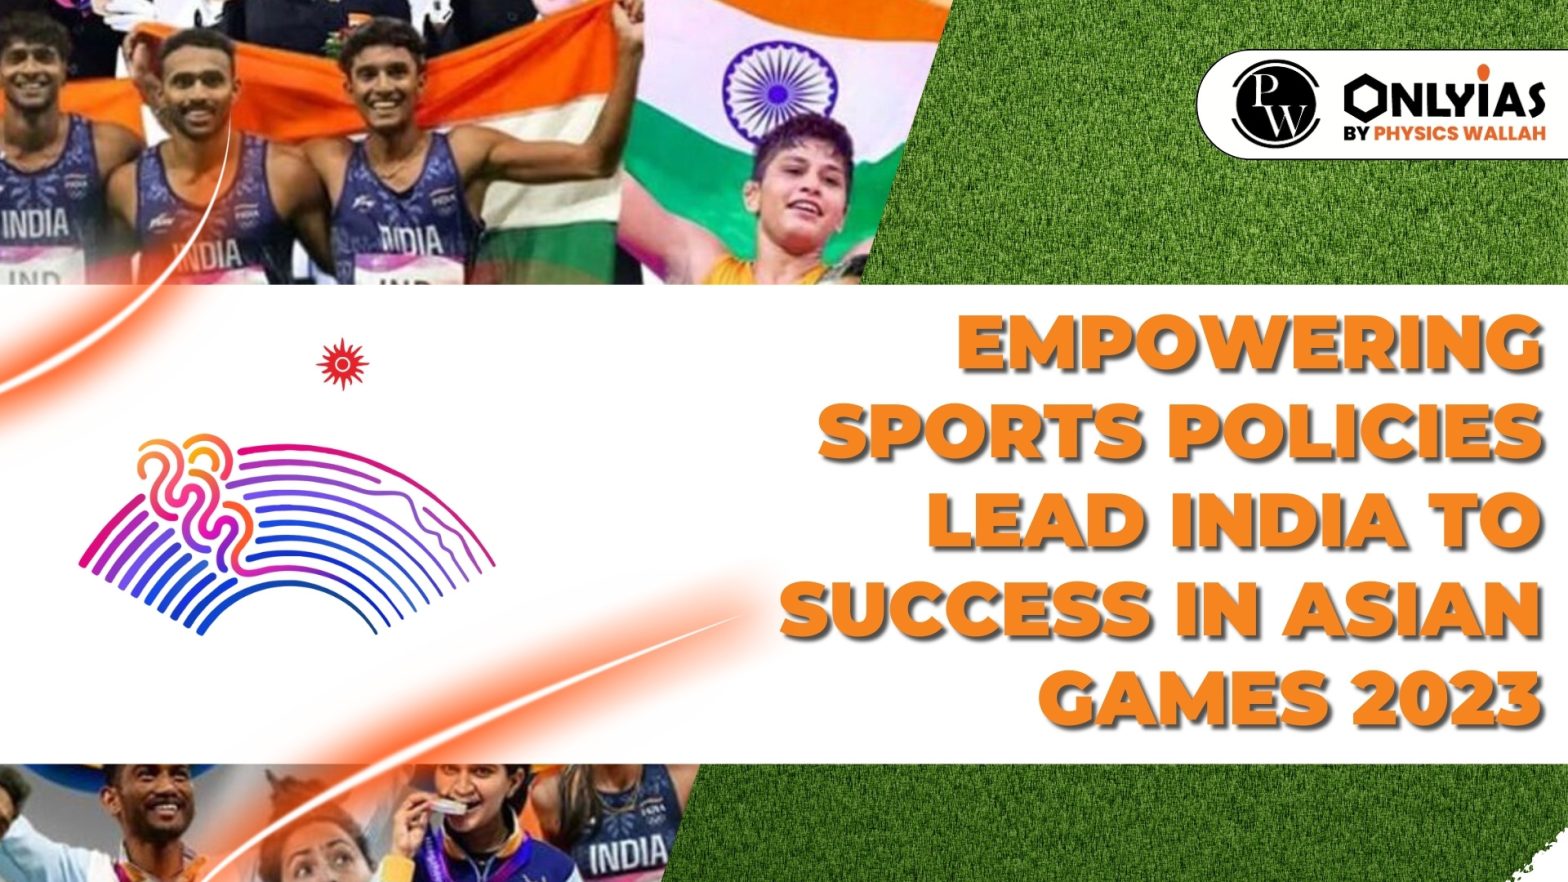 Empowering Sports Policies Lead India to Success in Asian Games 2023